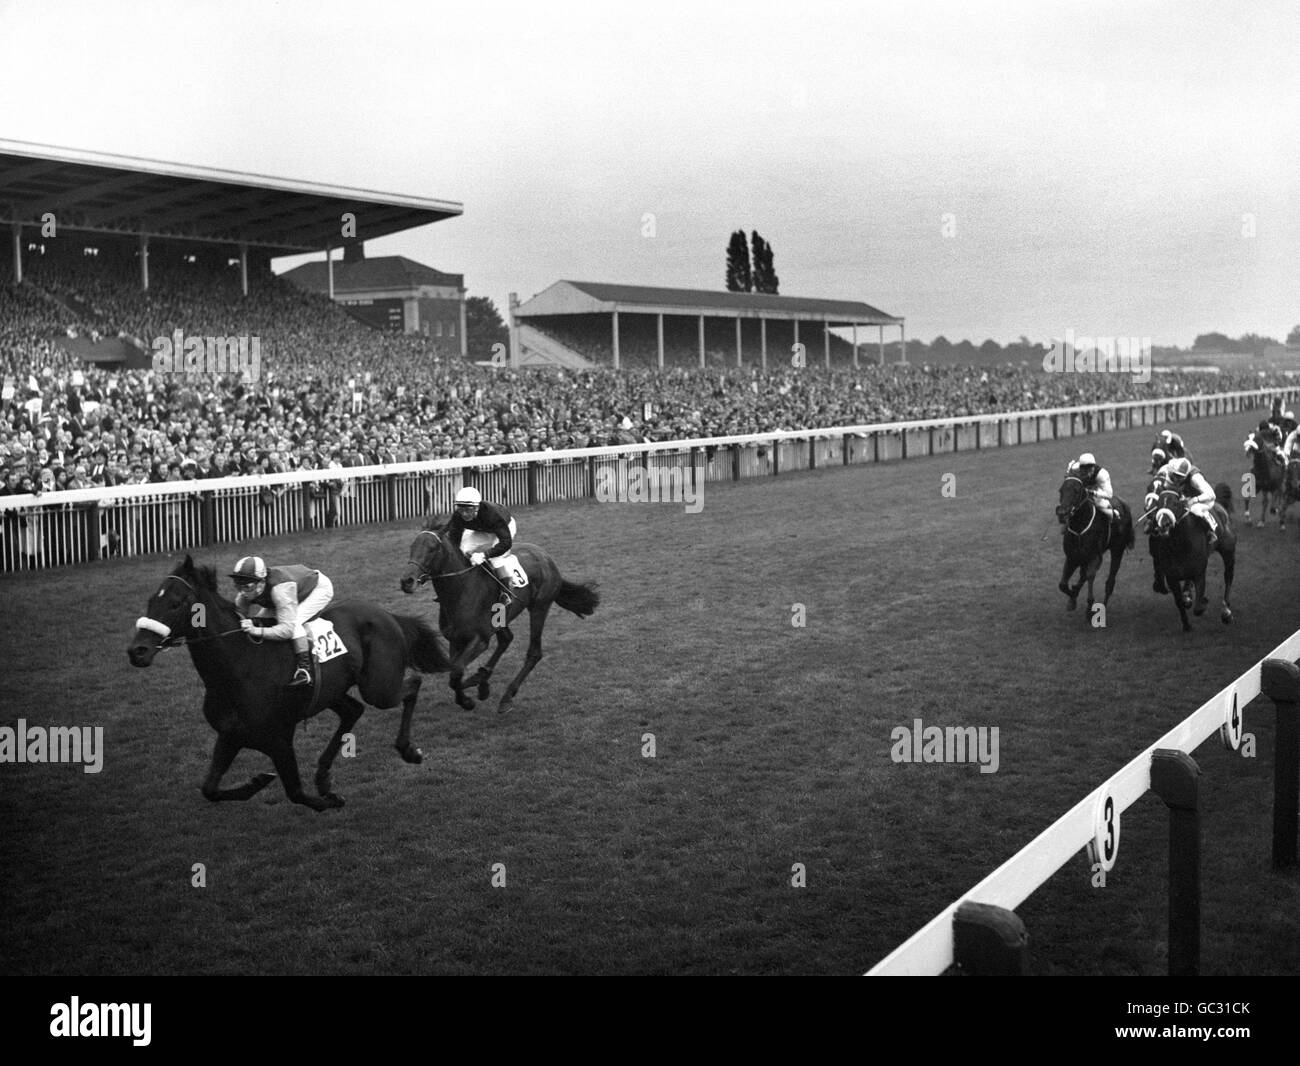 Twelfth Man (No.22), ridden by P. Cook wins the Ebor Handicap from Alcalde (No.9), ridden by D. Smith Stock Photo